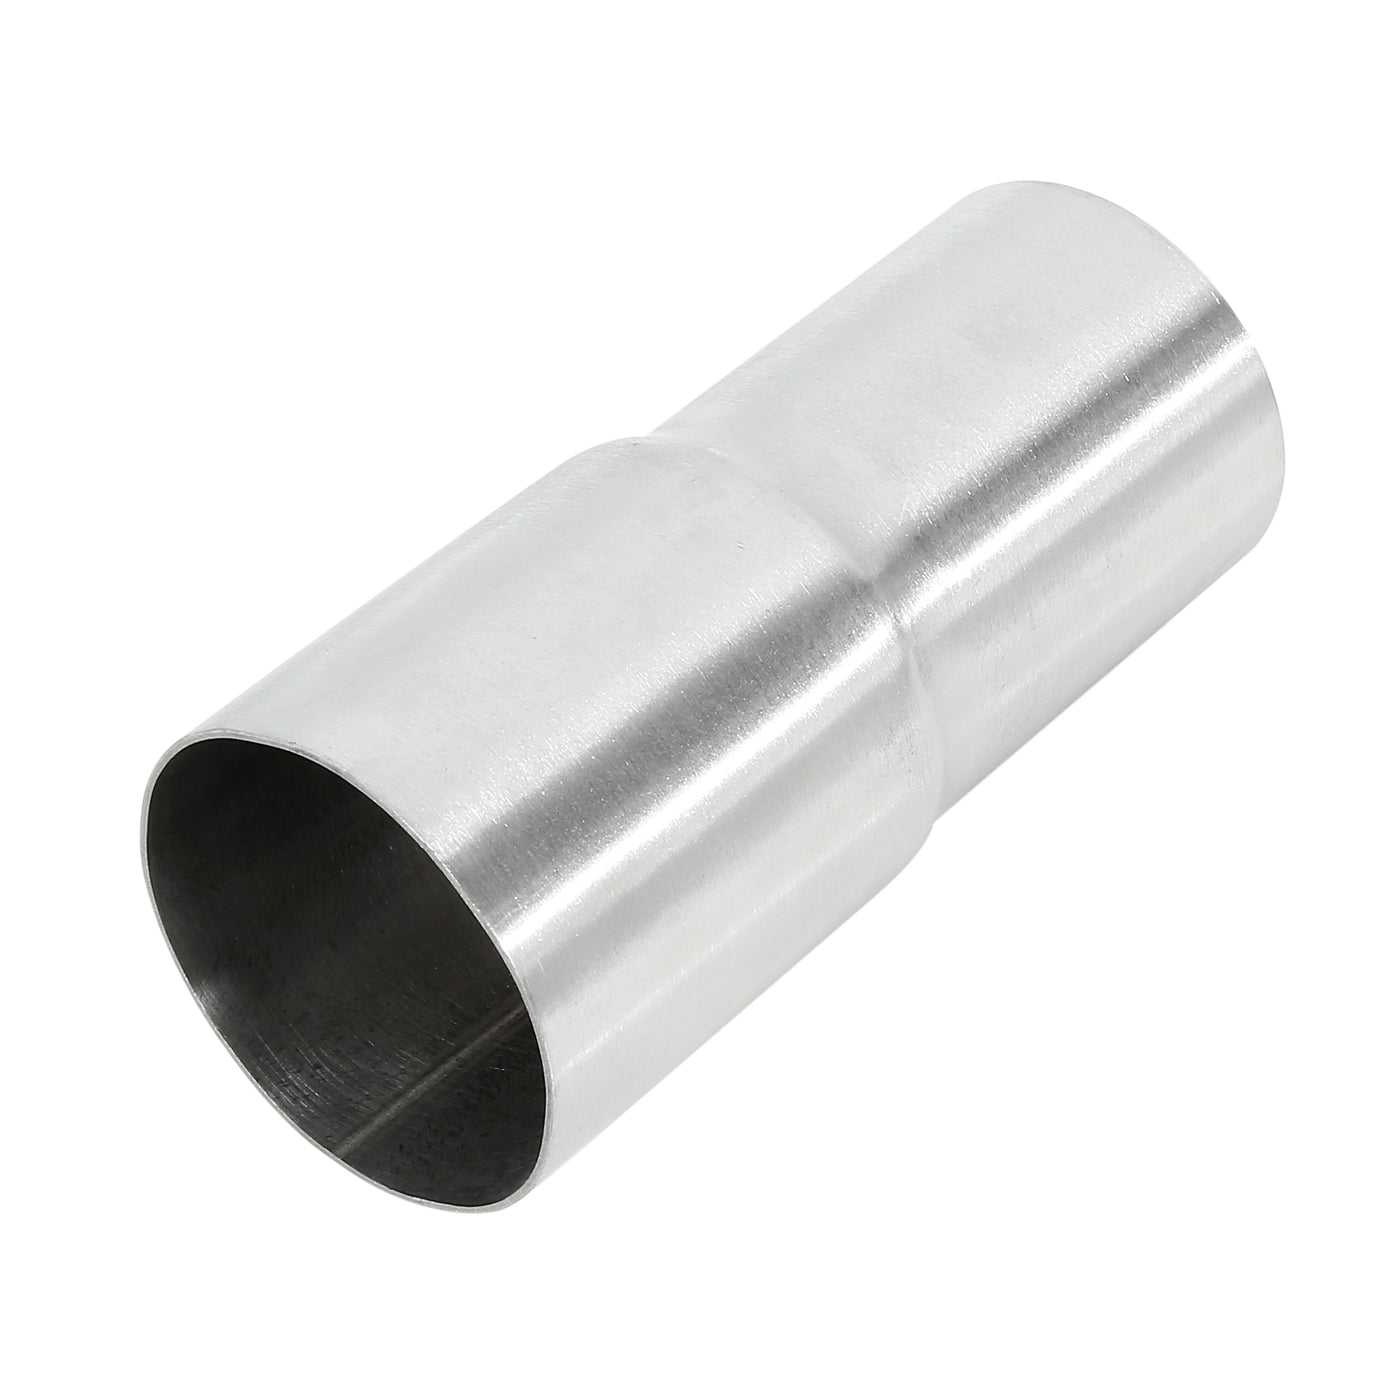 X AUTOHAUX 2.2" ID 2.5" OD Car Universal Exhaust Pipe to Component Adapter Reducer Connector